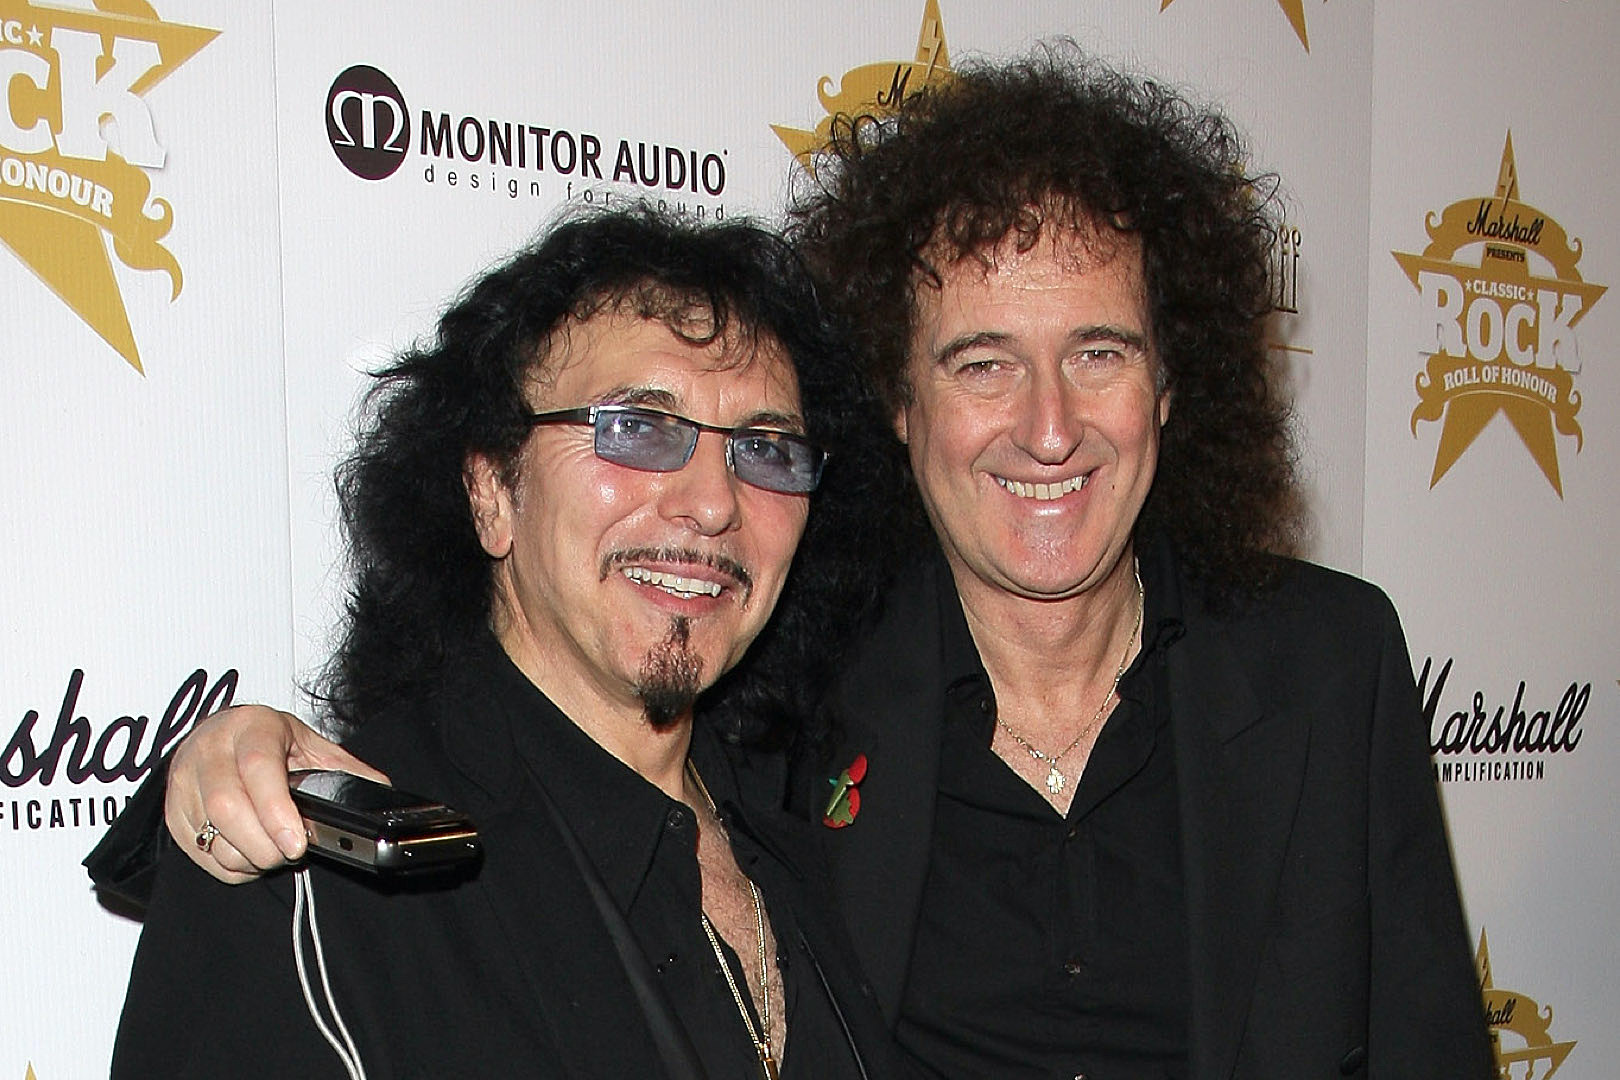 Tony Iommi Says He Still Wants to Collaborate With Brian May